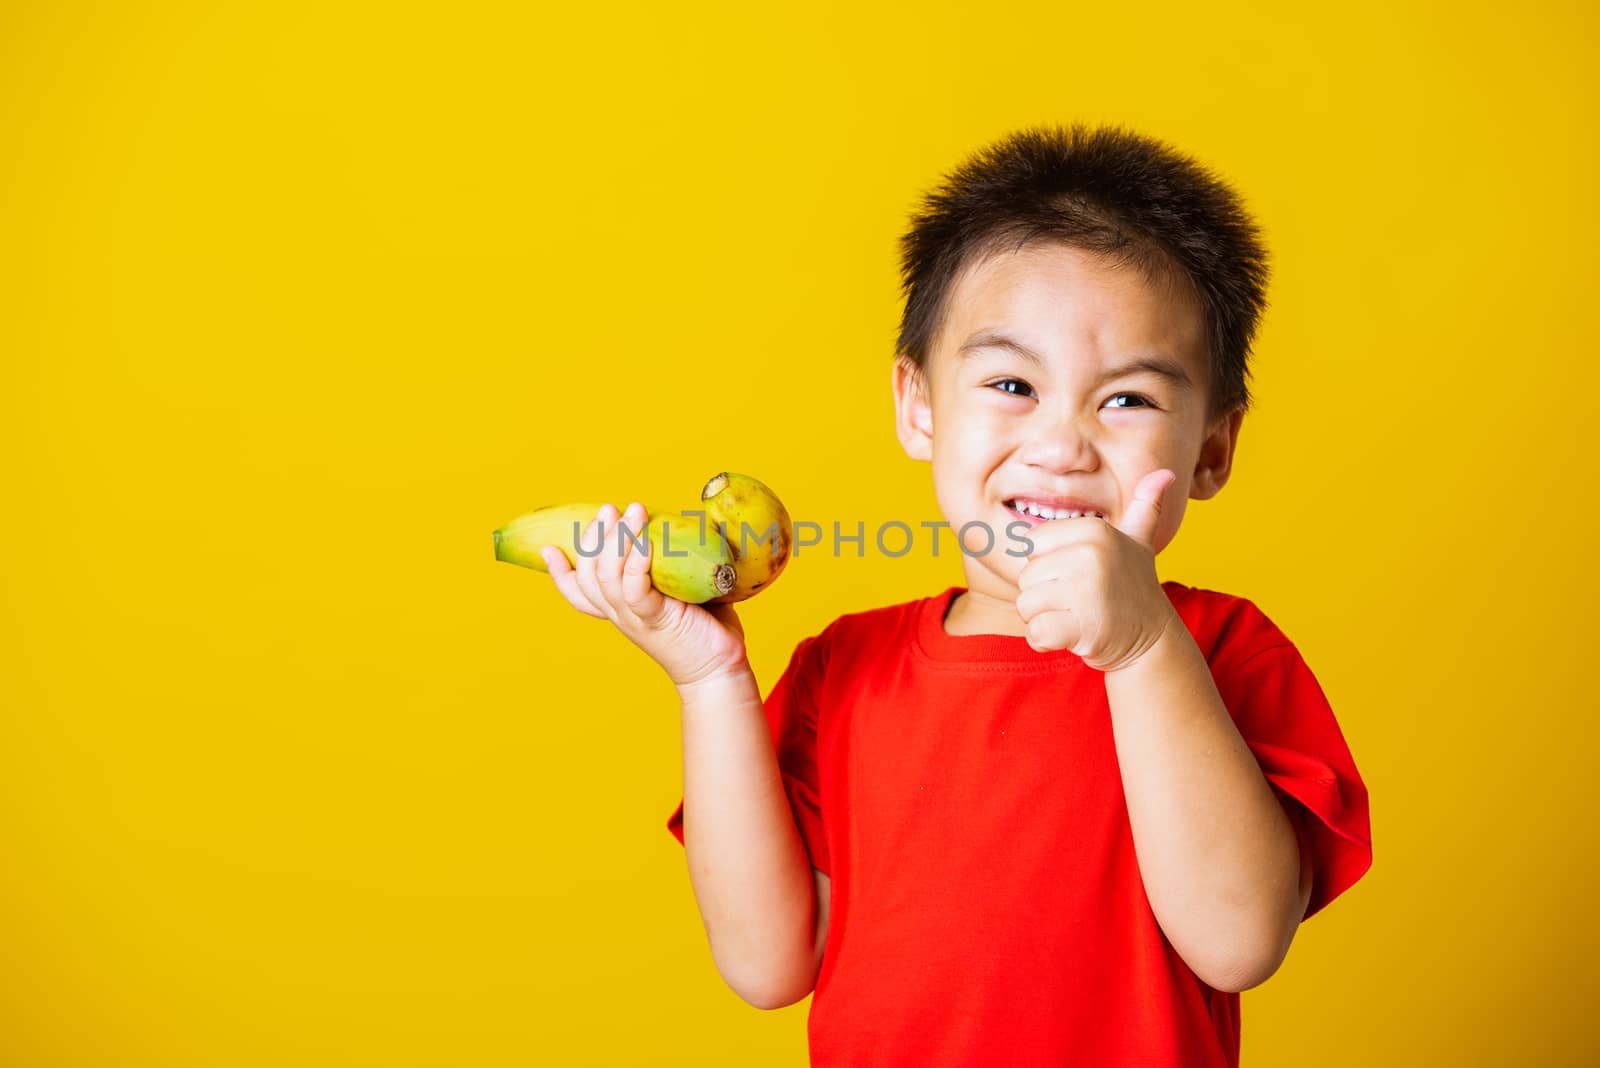 Happy portrait Asian child or kid cute little boy attractive smile wearing red t-shirt playing holds bananas and show finger thumb for good sign, studio shot isolated on yellow background